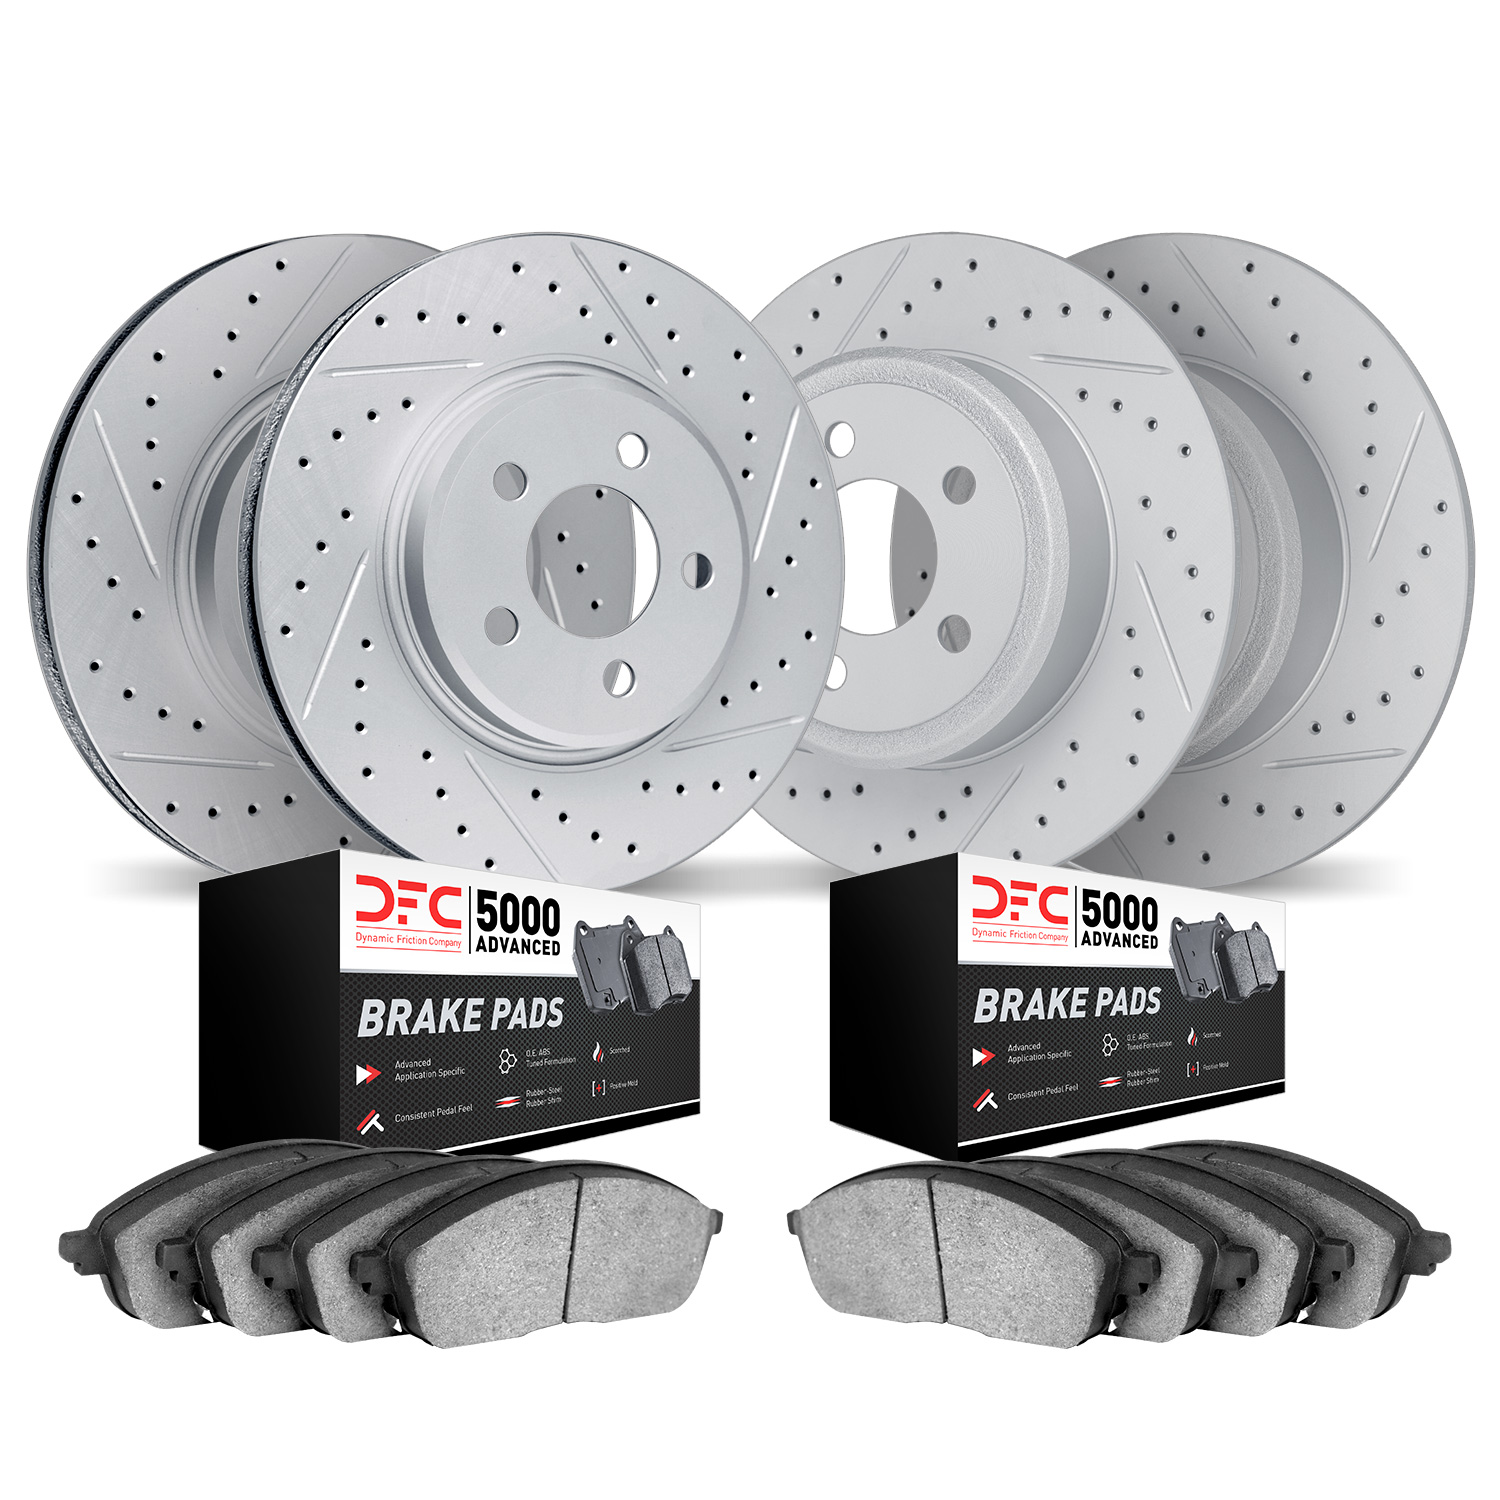 2504-58004 Geoperformance Drilled/Slotted Rotors w/5000 Advanced Brake Pads Kit, 2017-2020 Acura/Honda, Position: Front and Rear